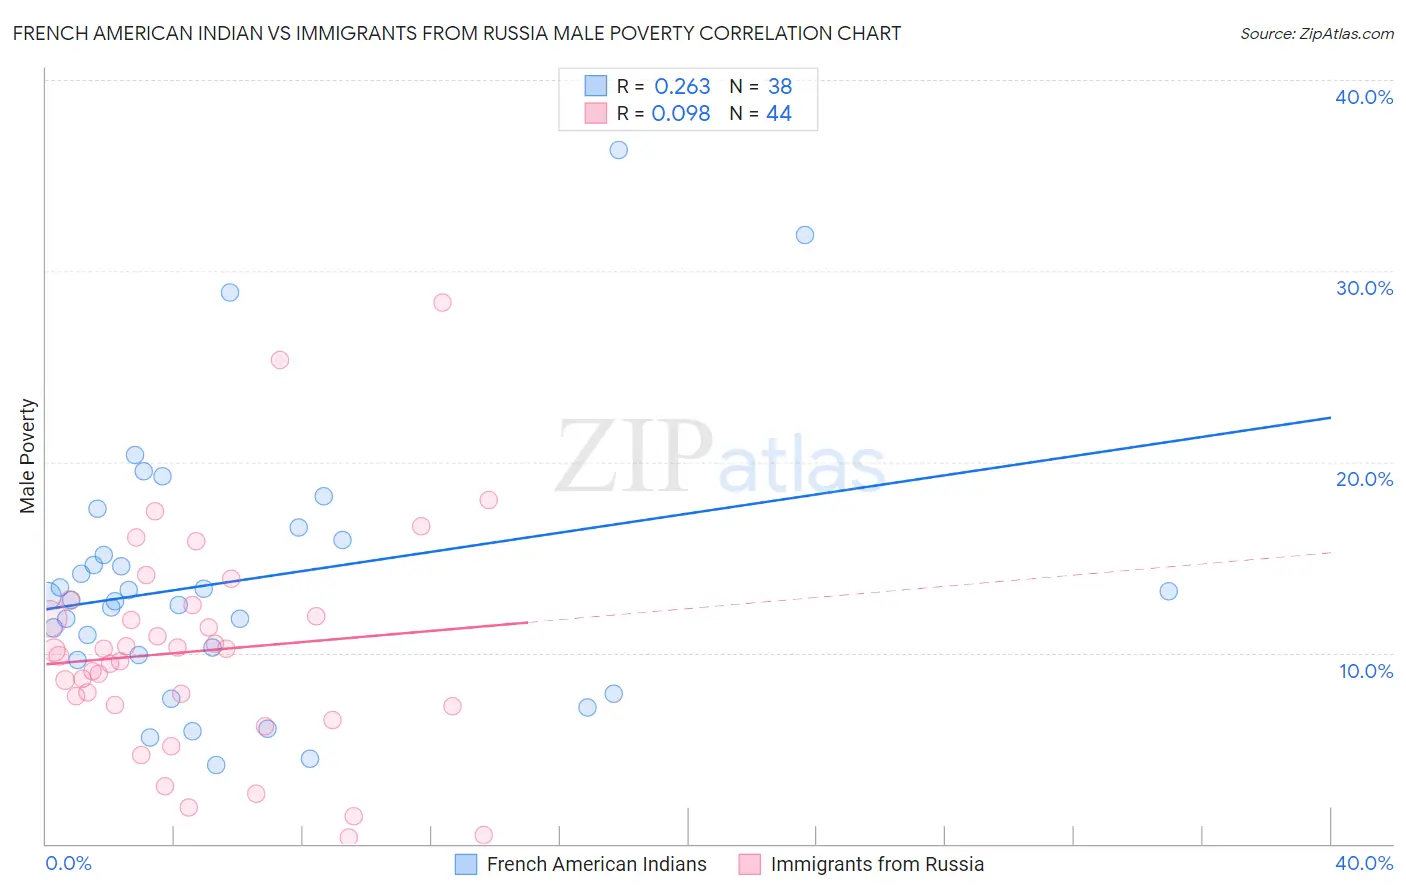 French American Indian vs Immigrants from Russia Male Poverty